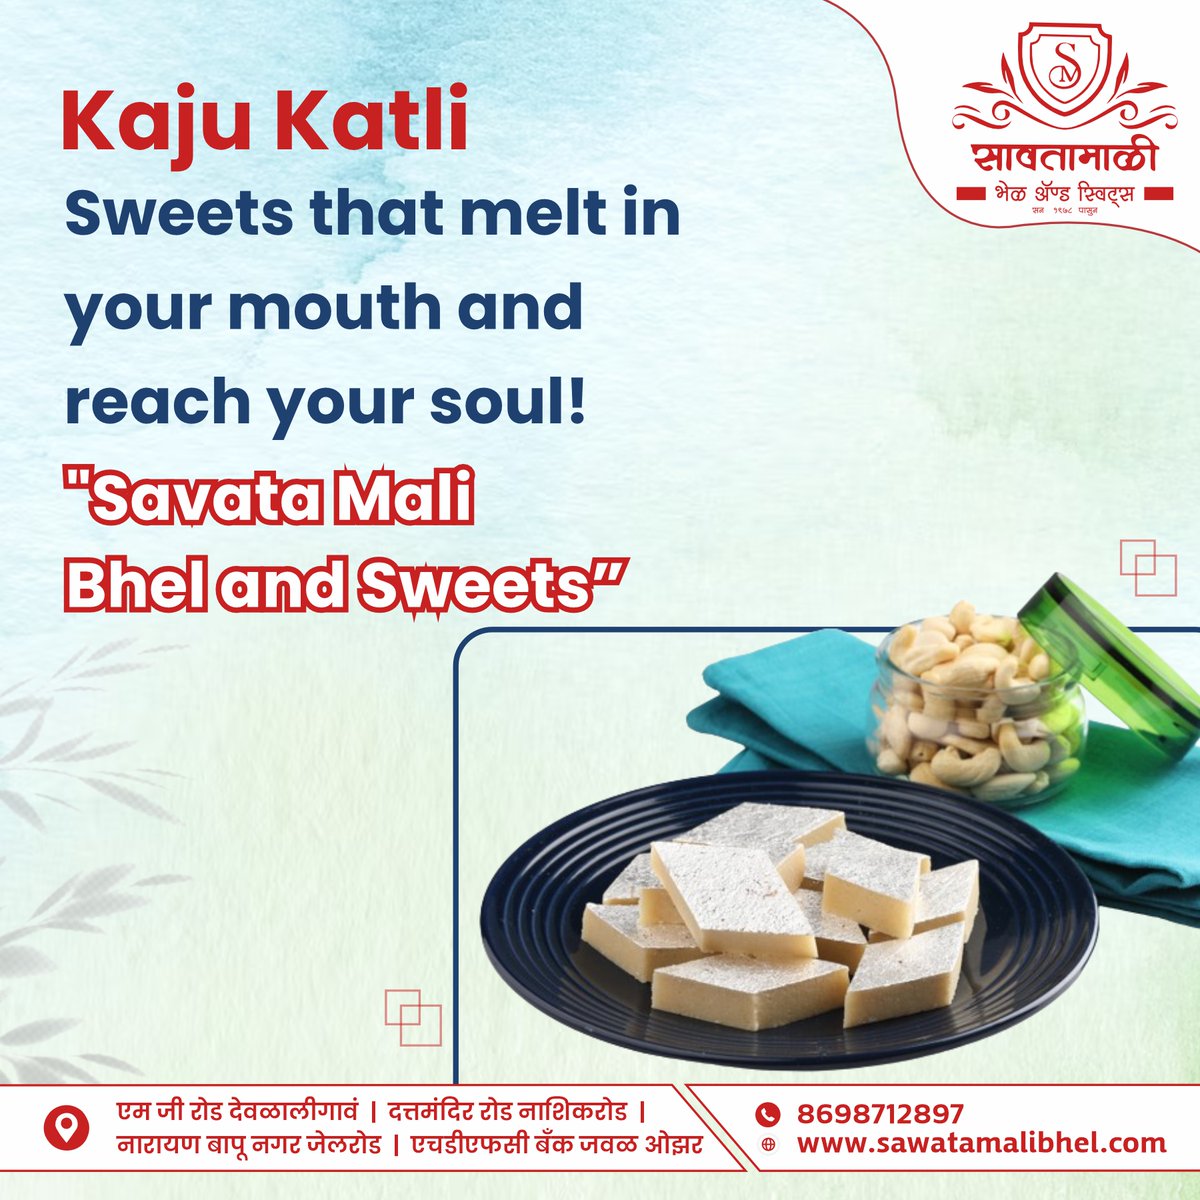 🍬✨ Indulge in the heavenly delight of Kaju Katli Sweets that melt in your mouth and touch your soul! Experience the magic of 'Savata Mali Bhel and Sweets' 📞8698712897 #KajuKatli #Sweets #Delicious #Soulful #SweetTooth #IndianSweets #Foodie #Yummy #TreatYourself #Desserts